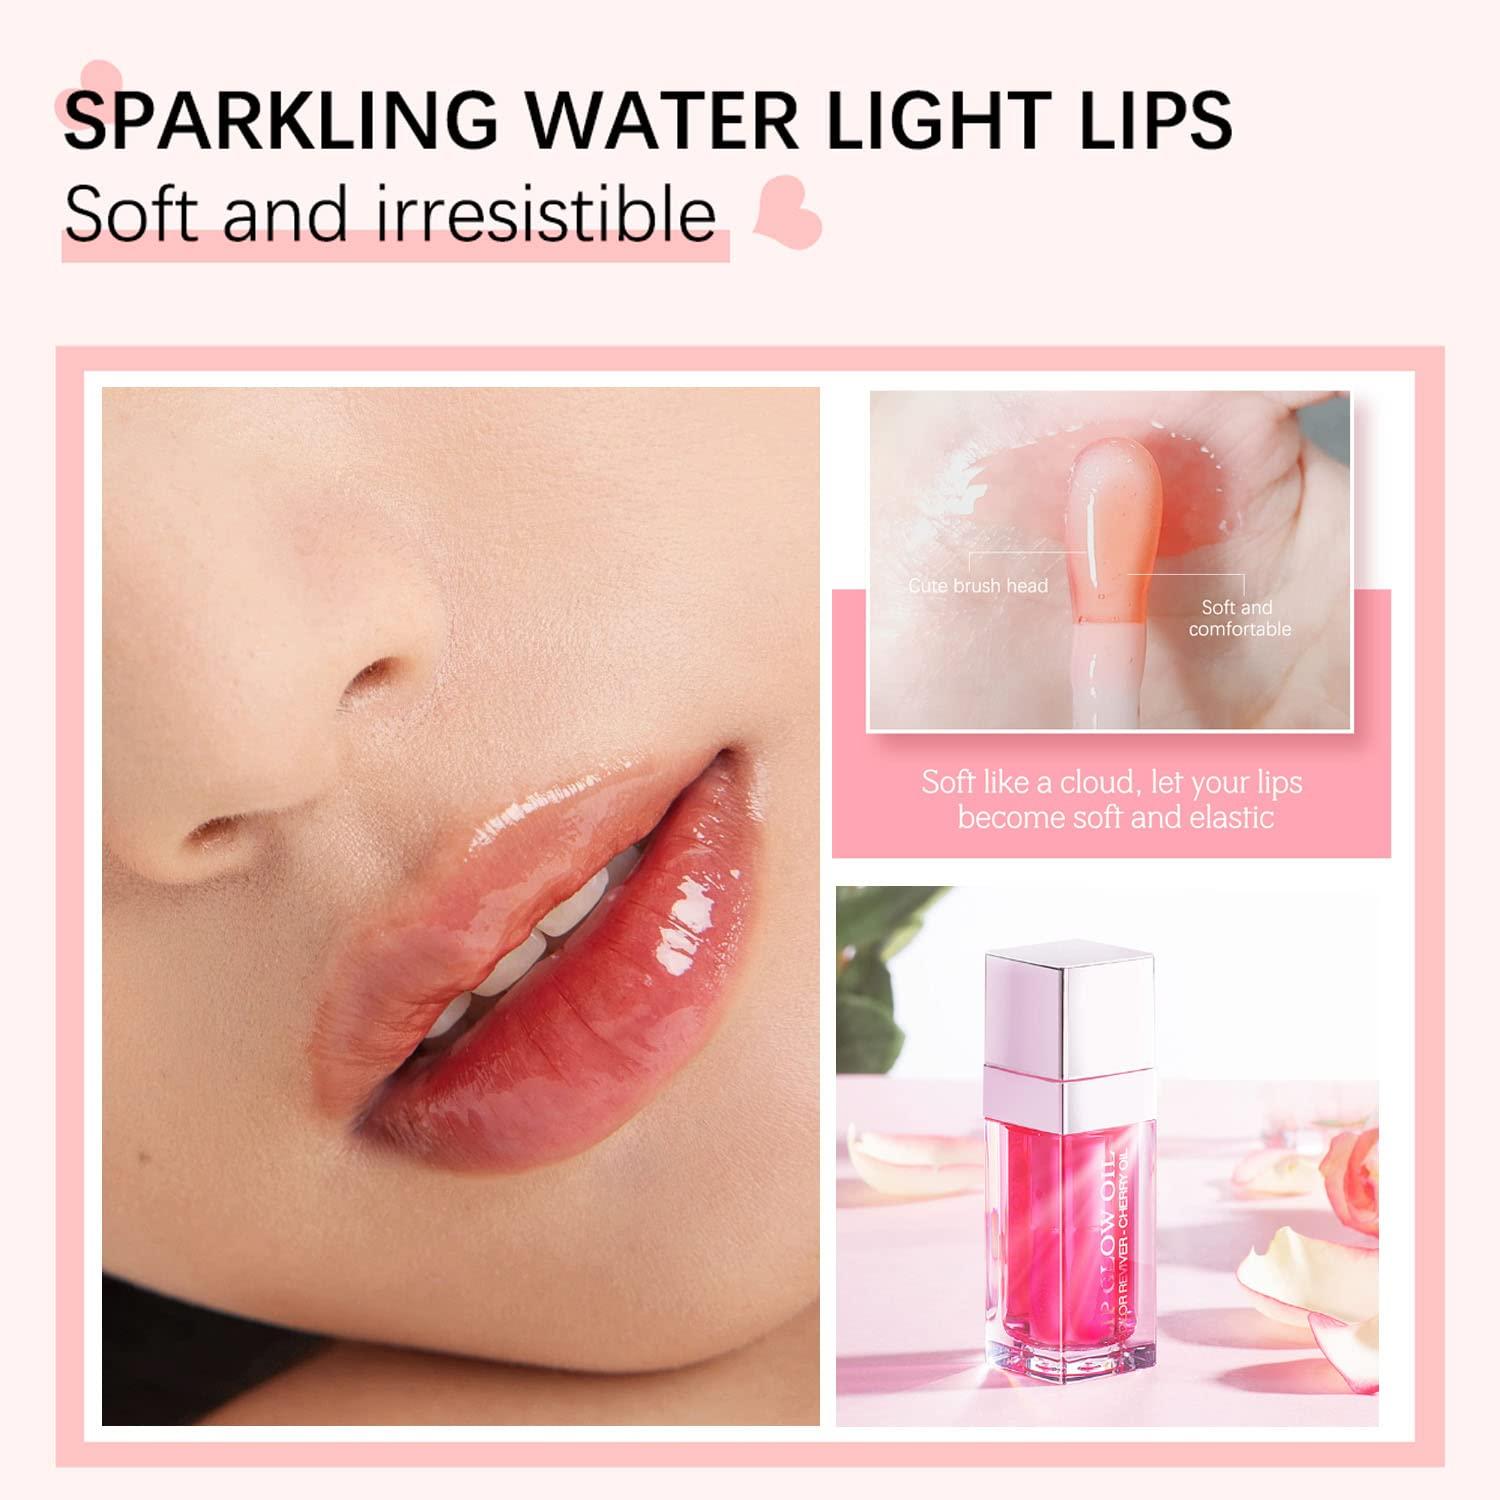 Tinted Lasting Hydrating Oil Rosewood) Moisturizing Plumper DMXYWO Gloss Glow 6ML Natural Balm Lip Lip Lip Lip Big Gloss (012 Brush Lip Plumping Product Lip Head Oil Non-Sticky Care